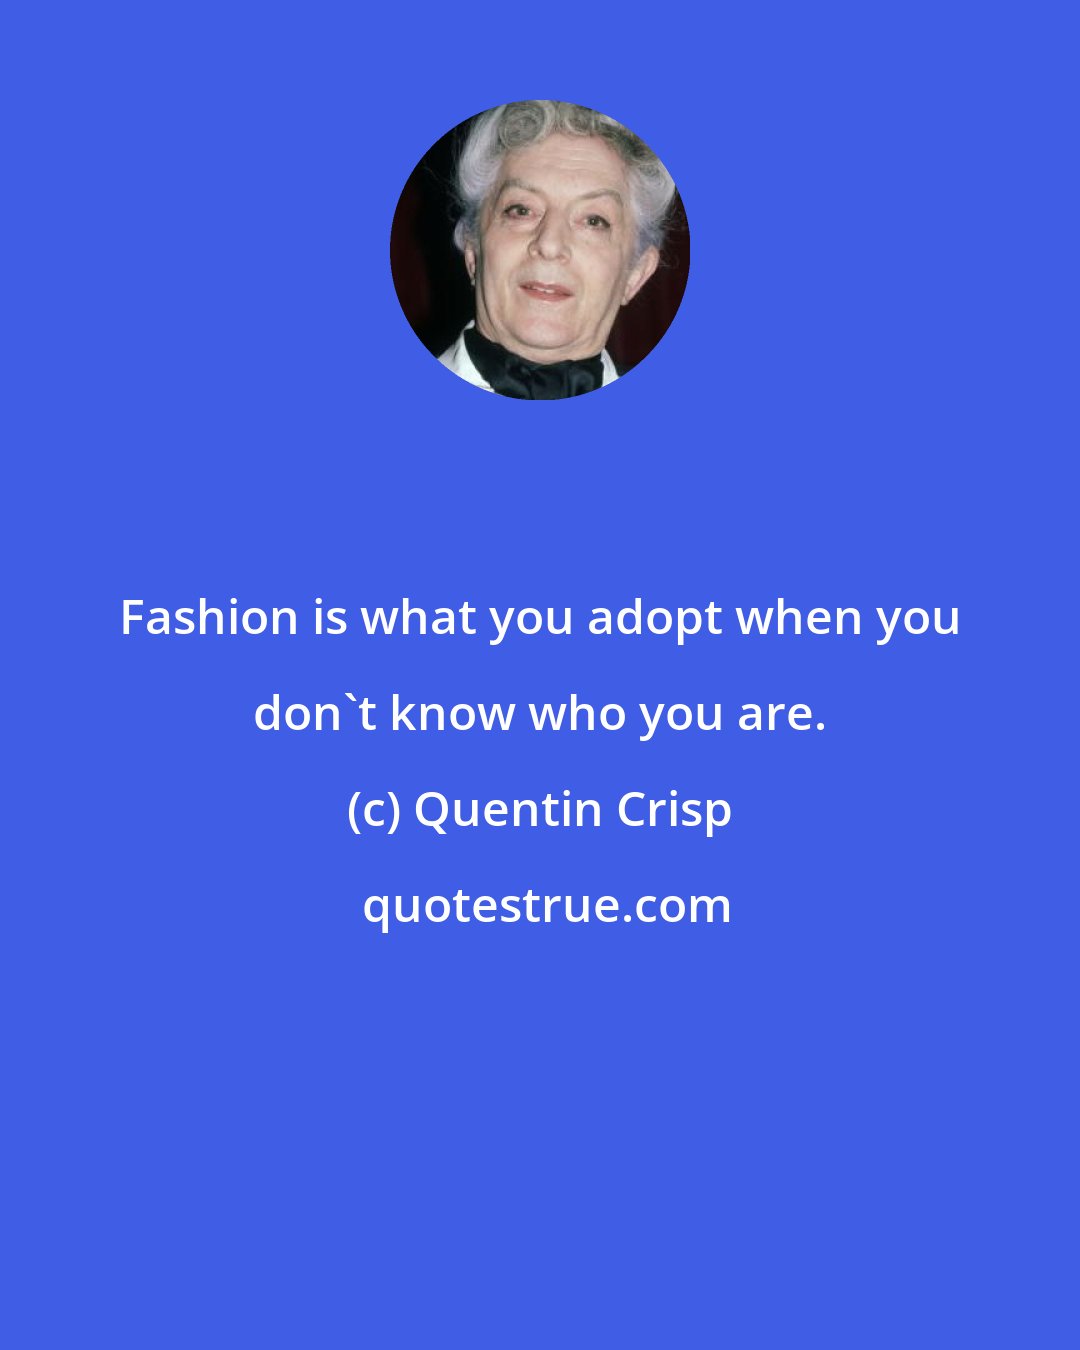 Quentin Crisp: Fashion is what you adopt when you don't know who you are.